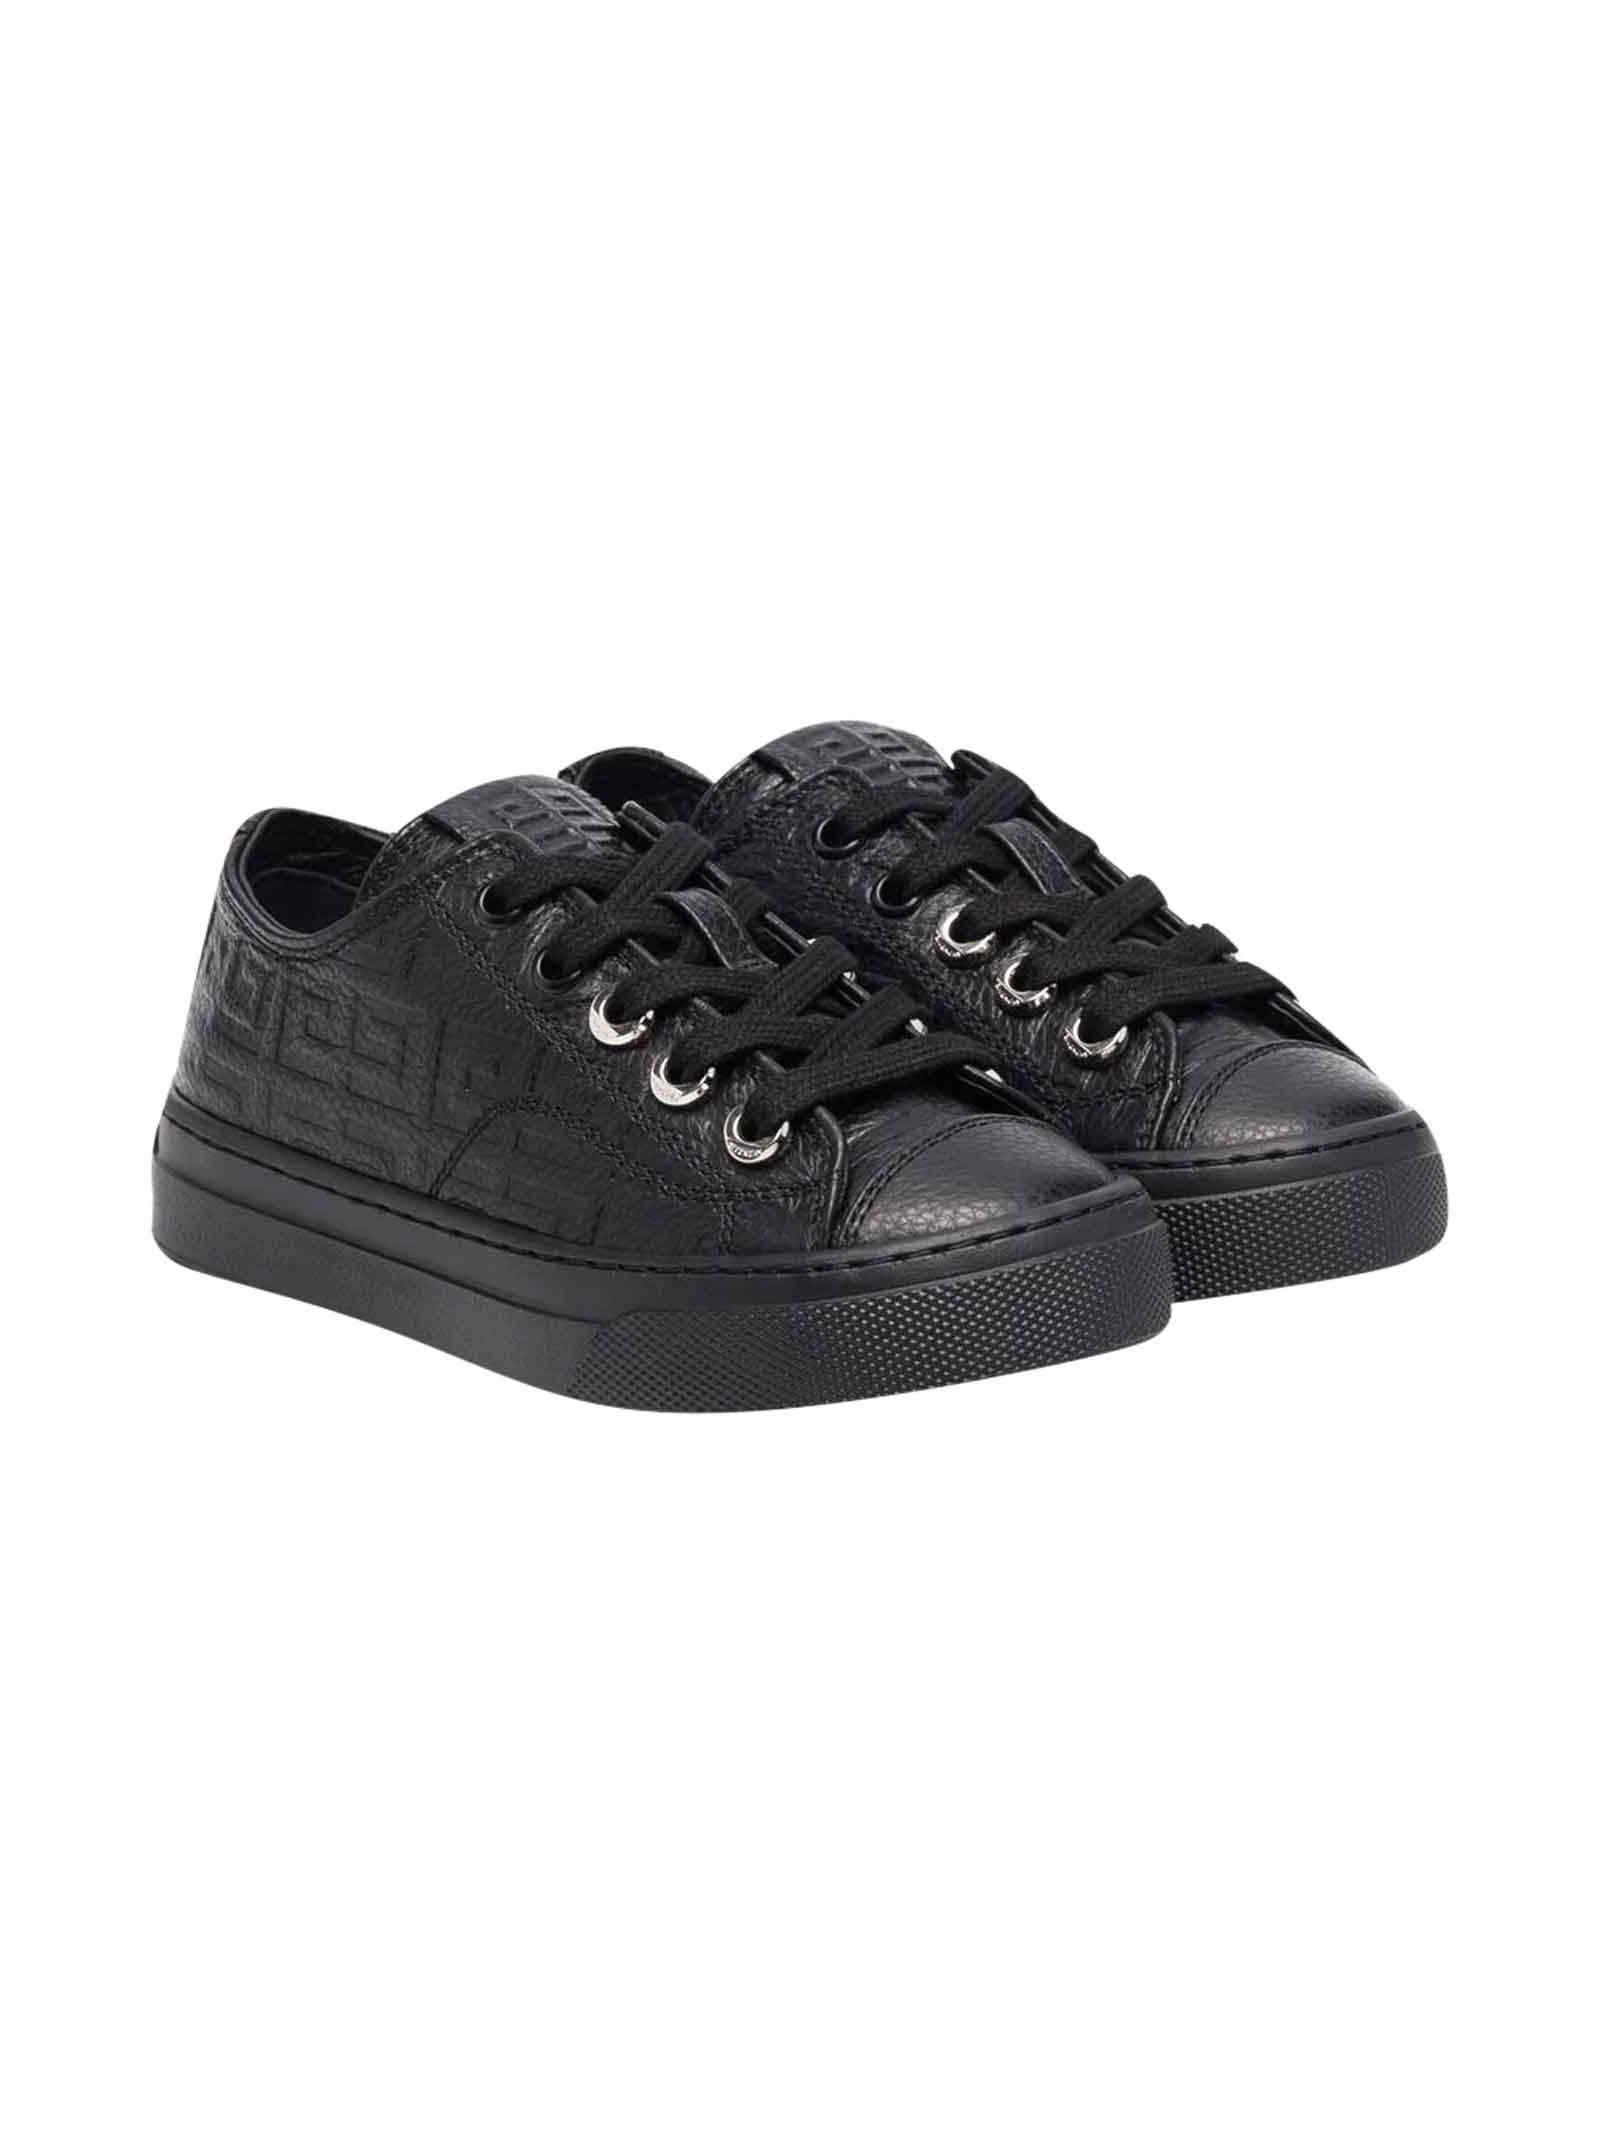 Givenchy Unisex Black Sneakers